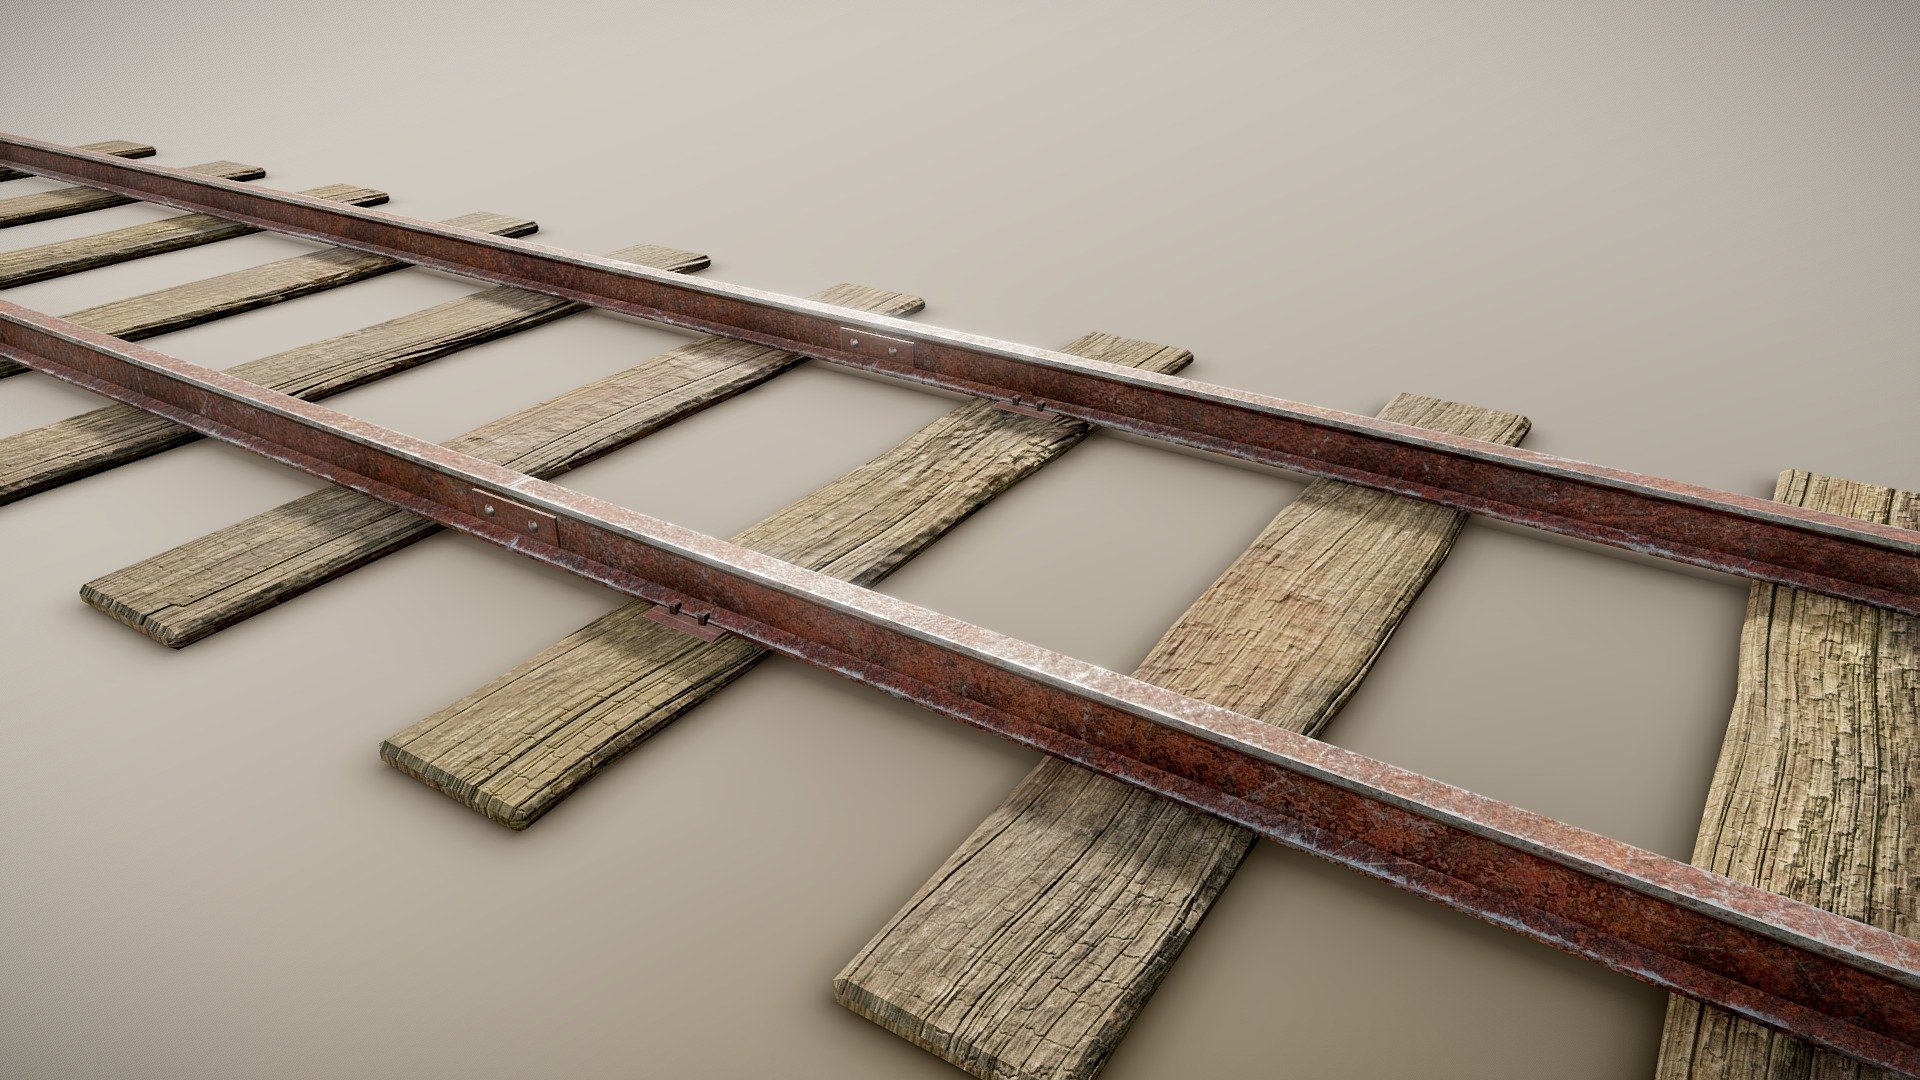 Details

2K and 4K textures

Low poly model 

arnold Render: https://www.artstation.com/artwork/L2Ve20

Contact me for any issue or questions https://www.artstation.com/bpaul/profile - Train Track - Buy Royalty Free 3D model by Paul (@nathan.d1563) 3d model